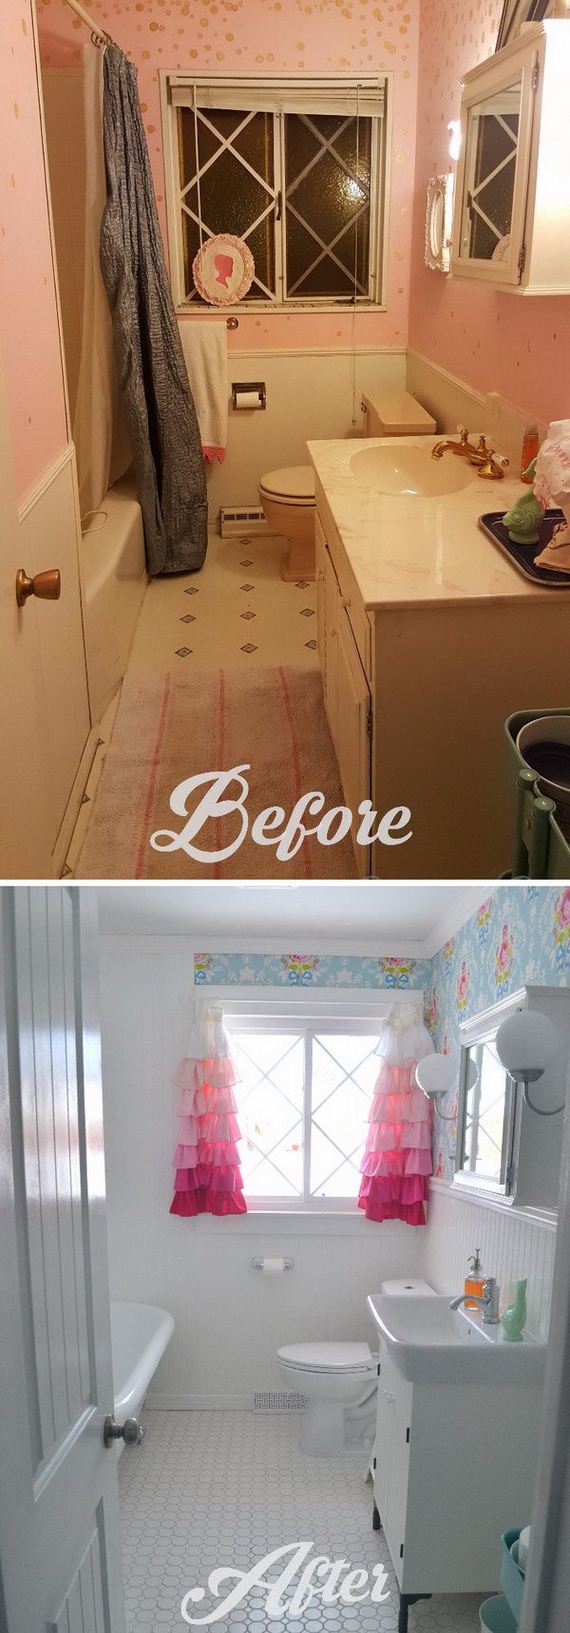 34-awesome-bathroom-makeovers